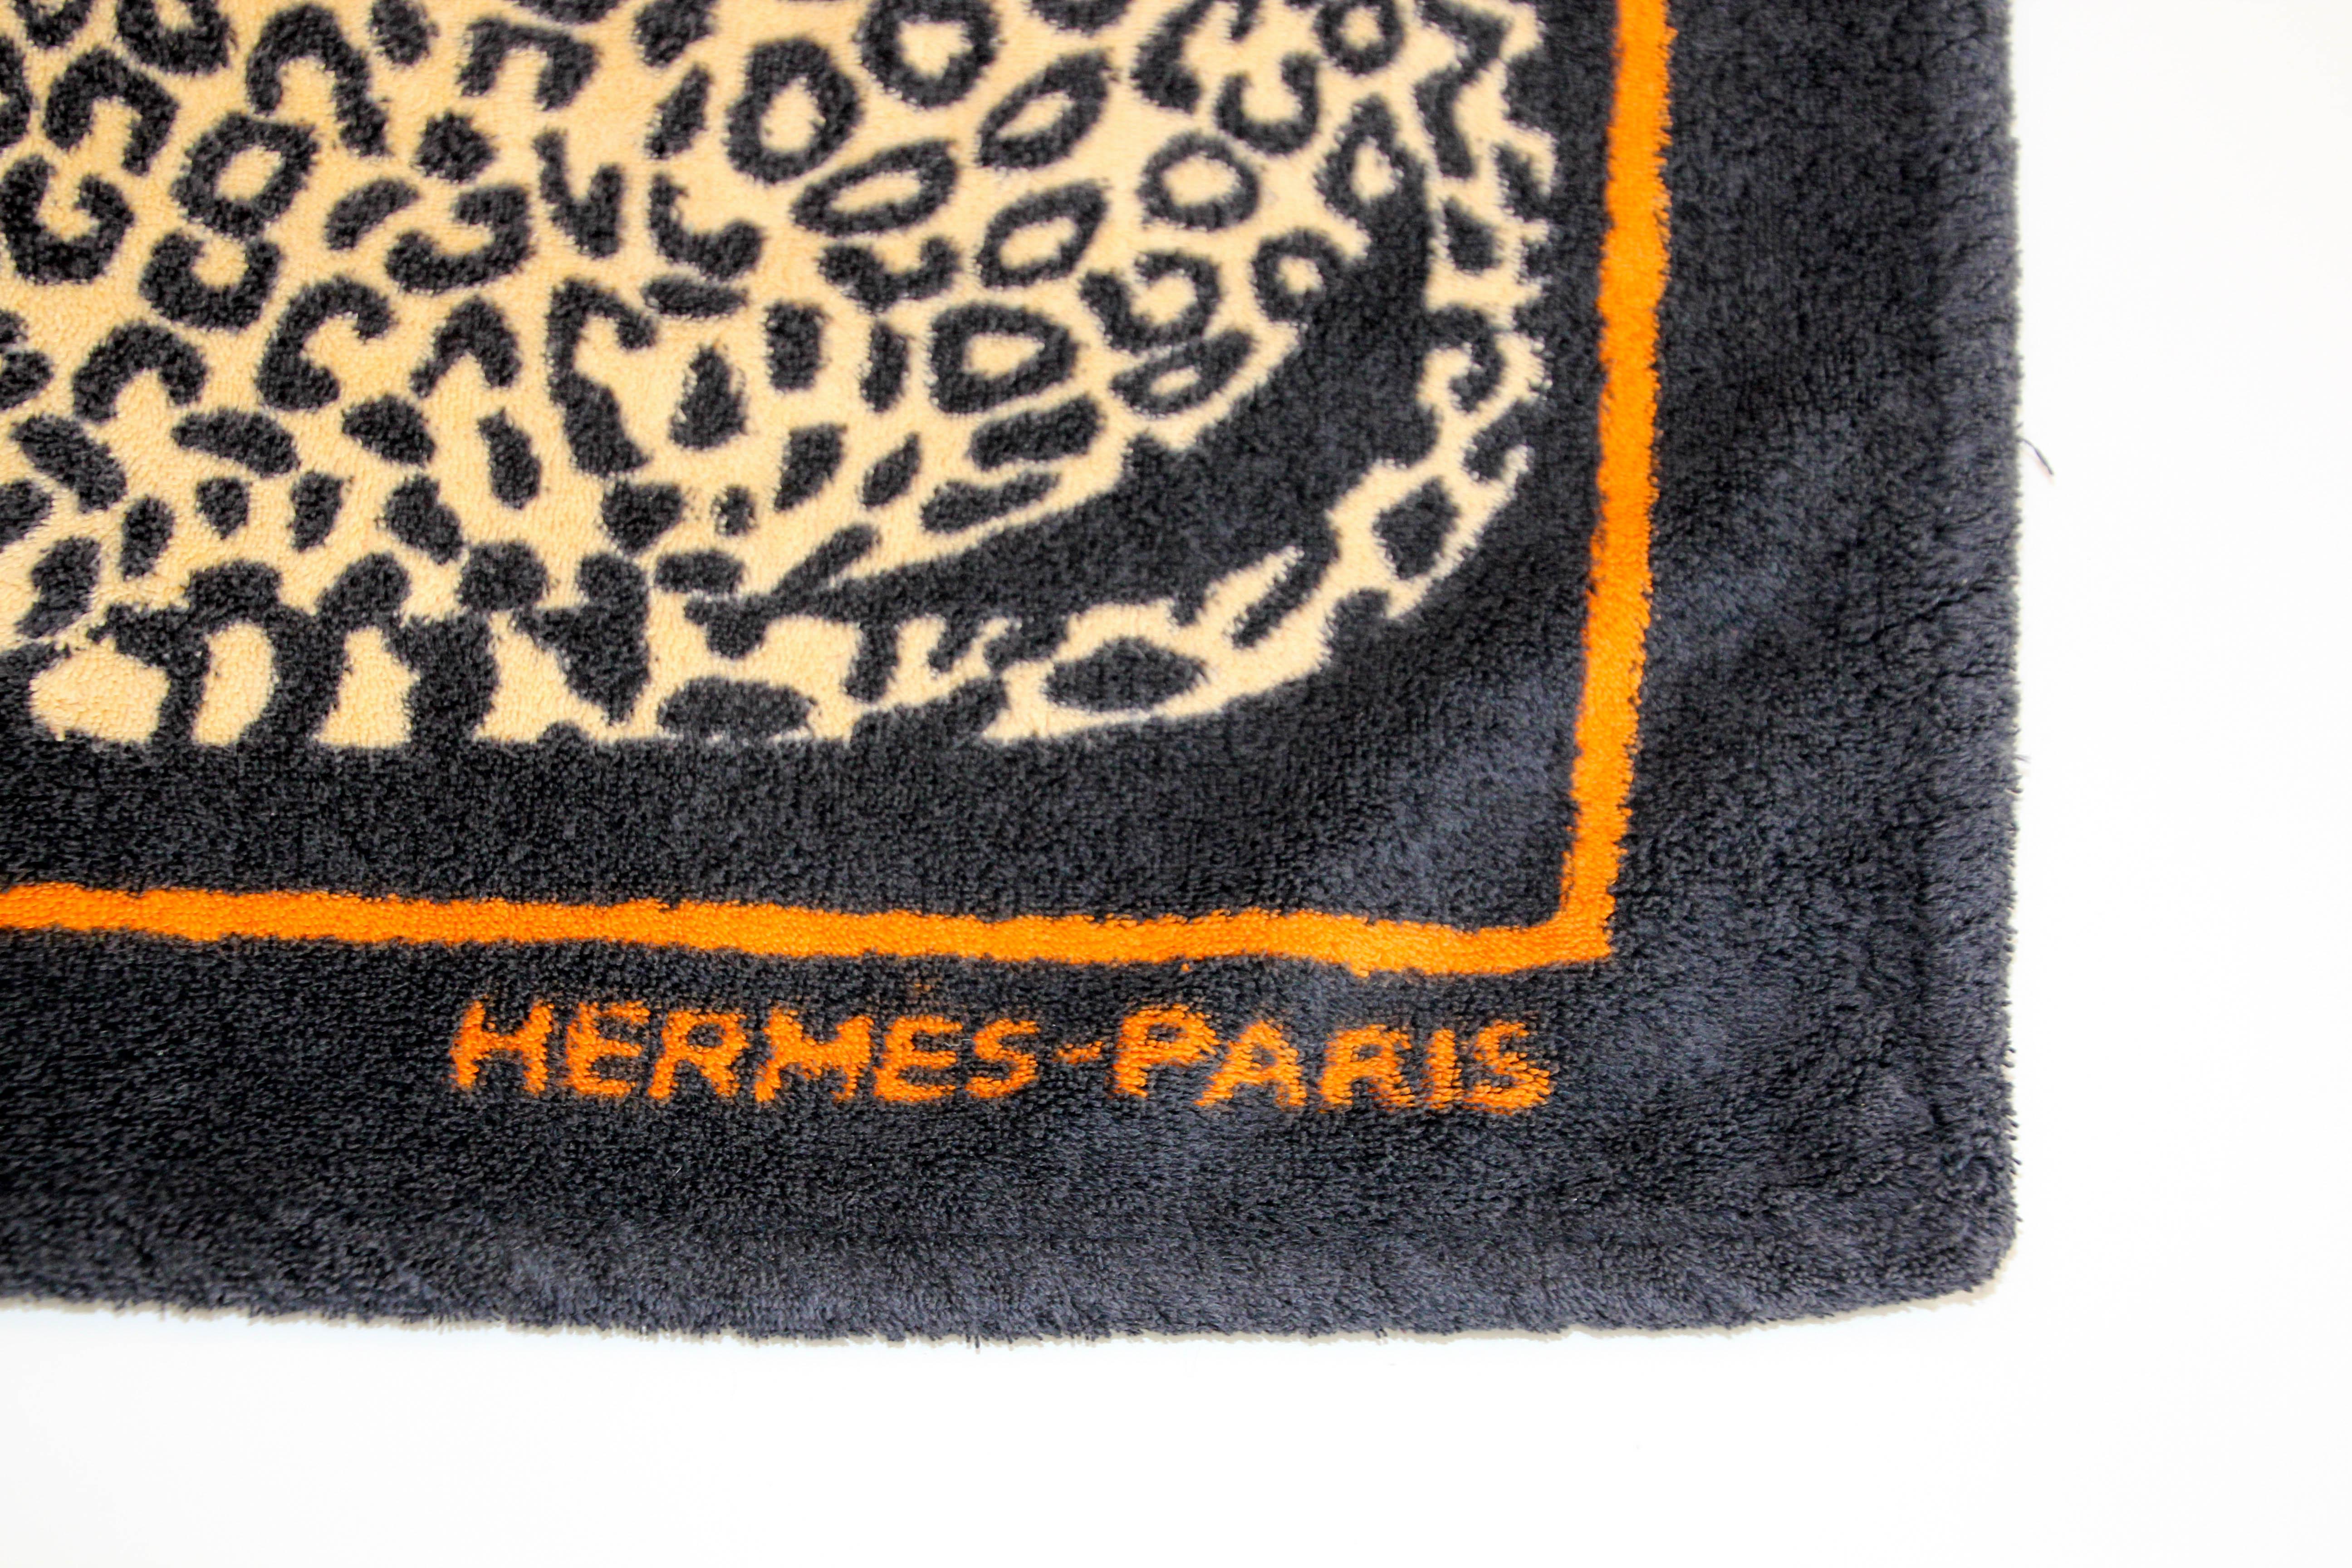 Hermes Paris Small Bath Mat with a Leopard Print in Black and Orange 3